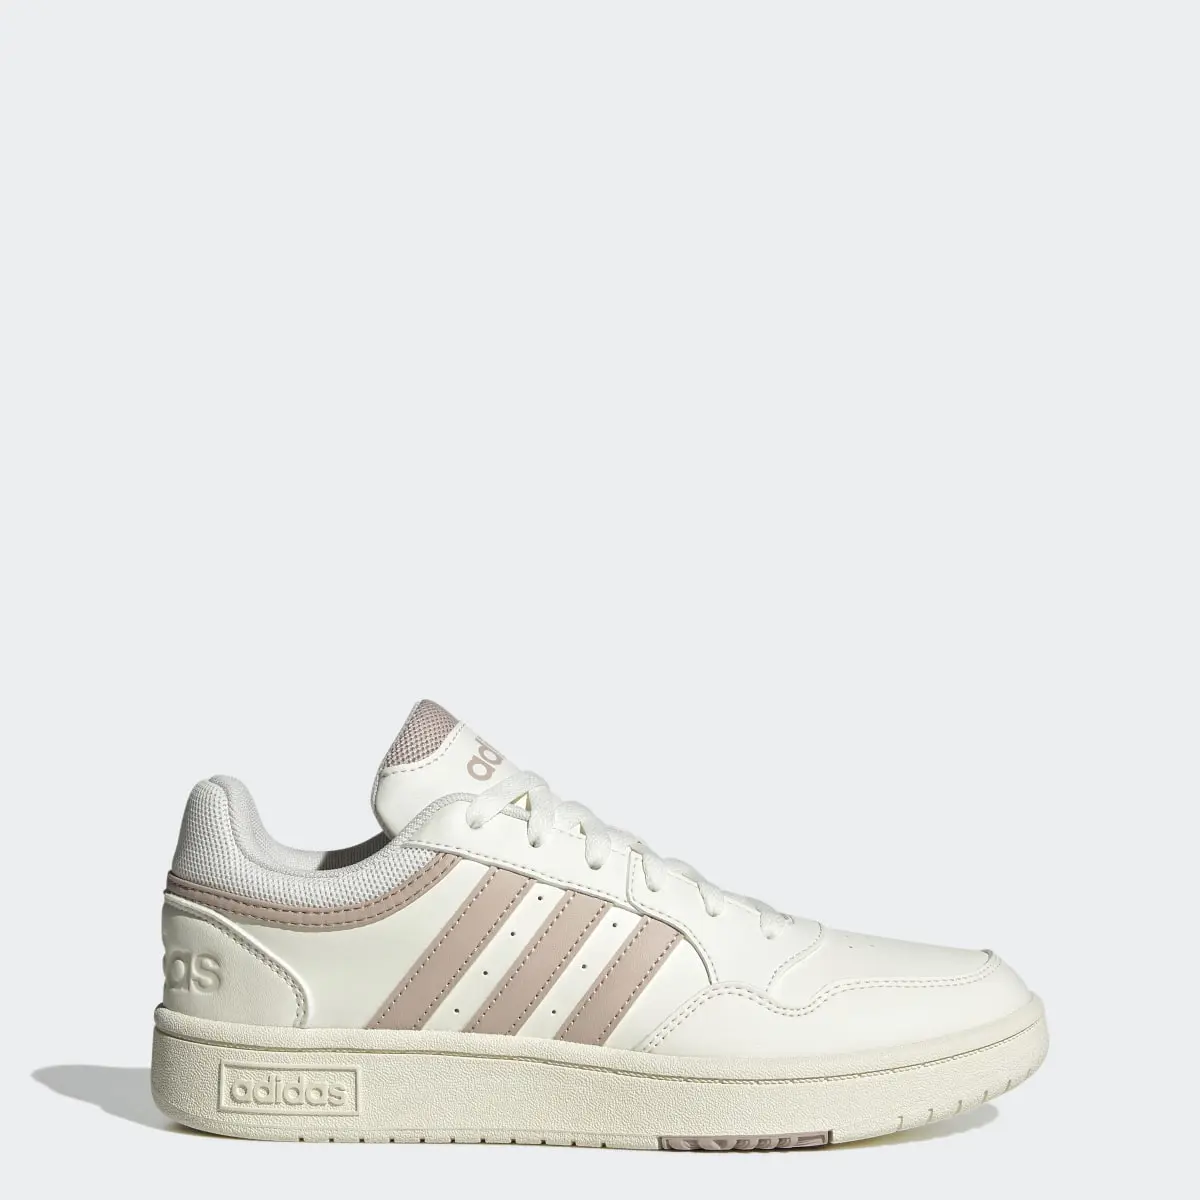 Adidas Hoops 3.0 Mid Lifestyle Basketball Low Schuh. 1